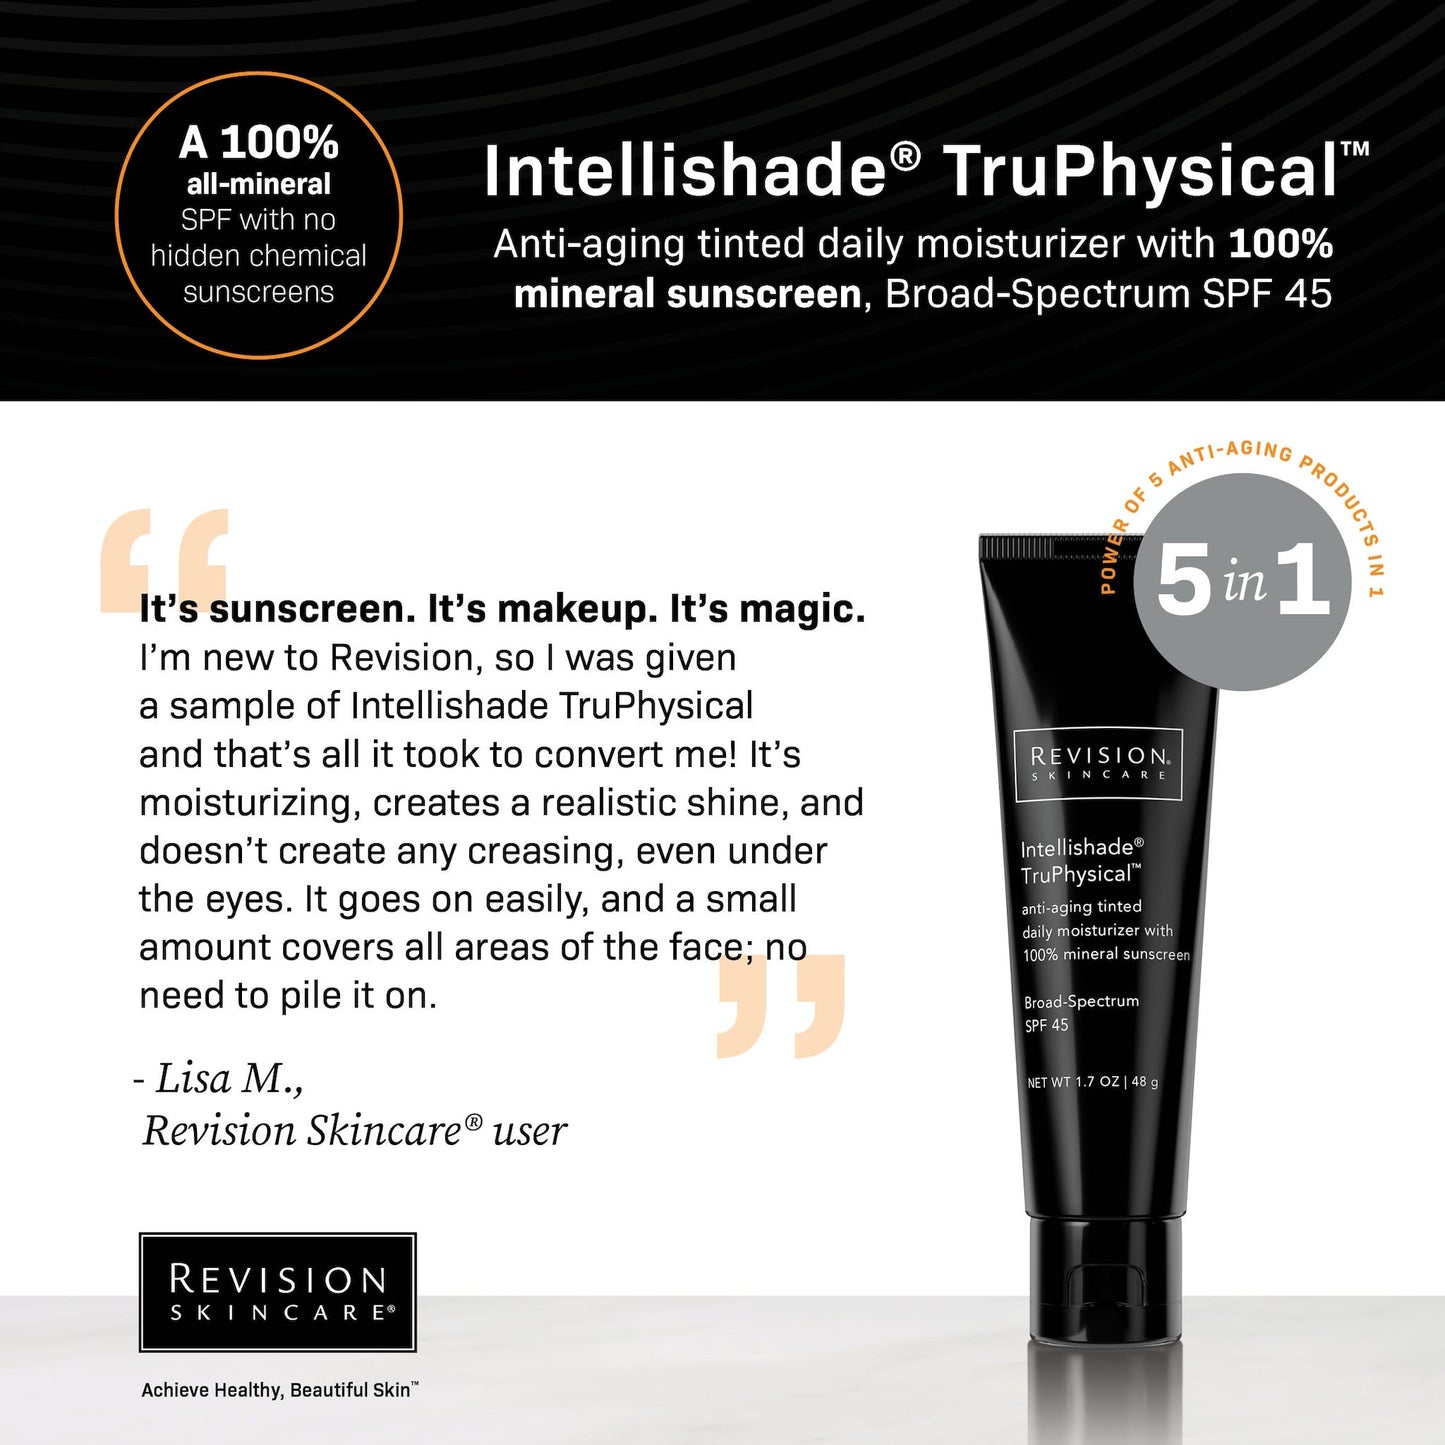 revision-Intellishade-TruPhysical-quote-sunscreen-tinted-dca-advanced-skincare-center